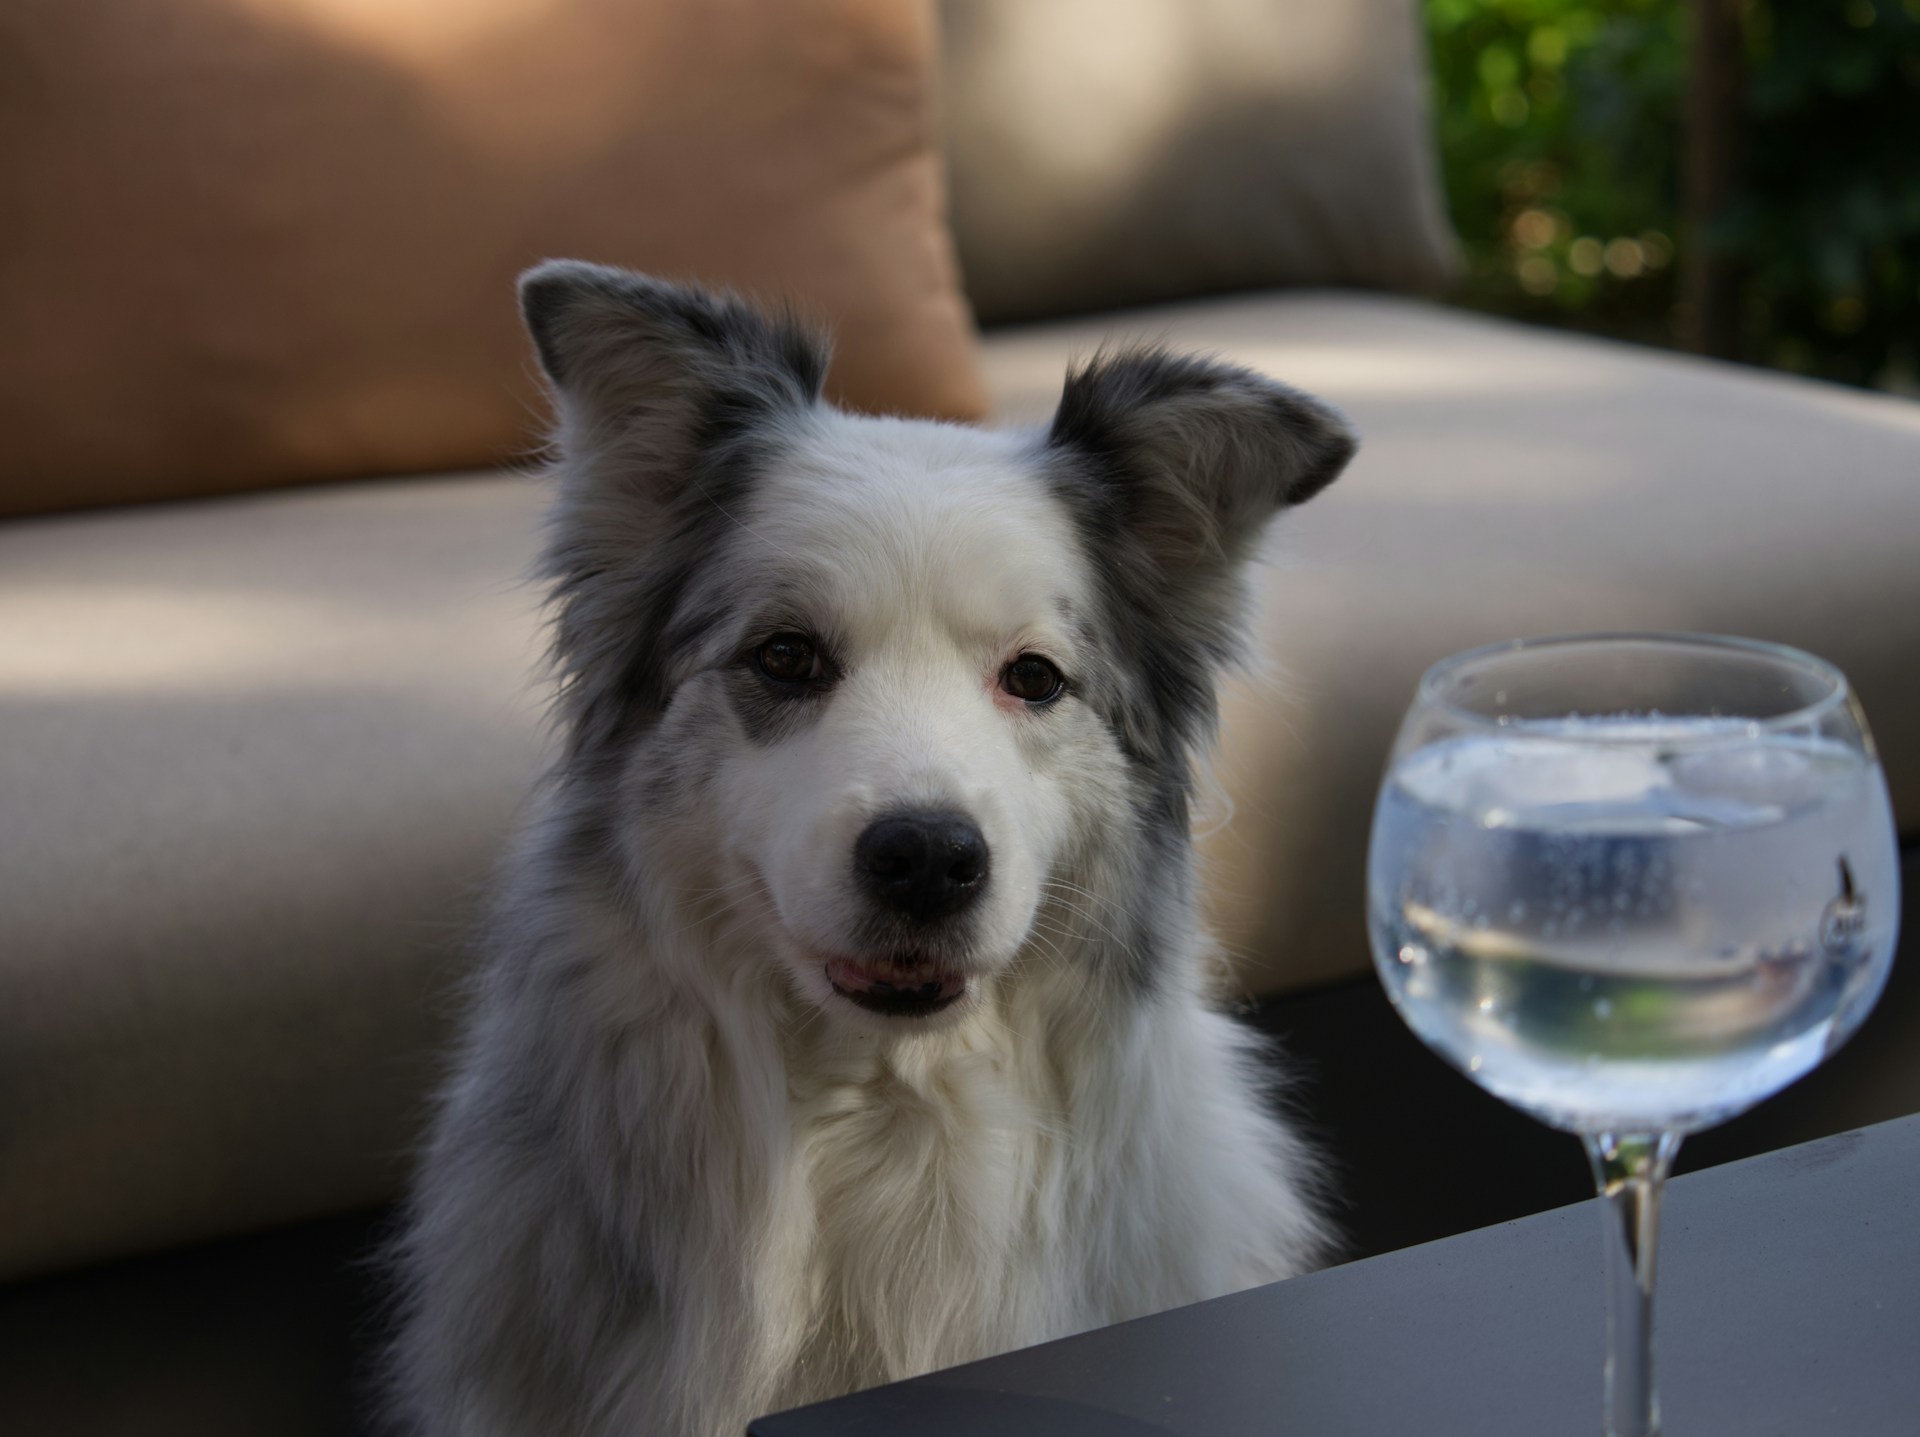 A white dog sitting in front of a coffee table with a glass of water